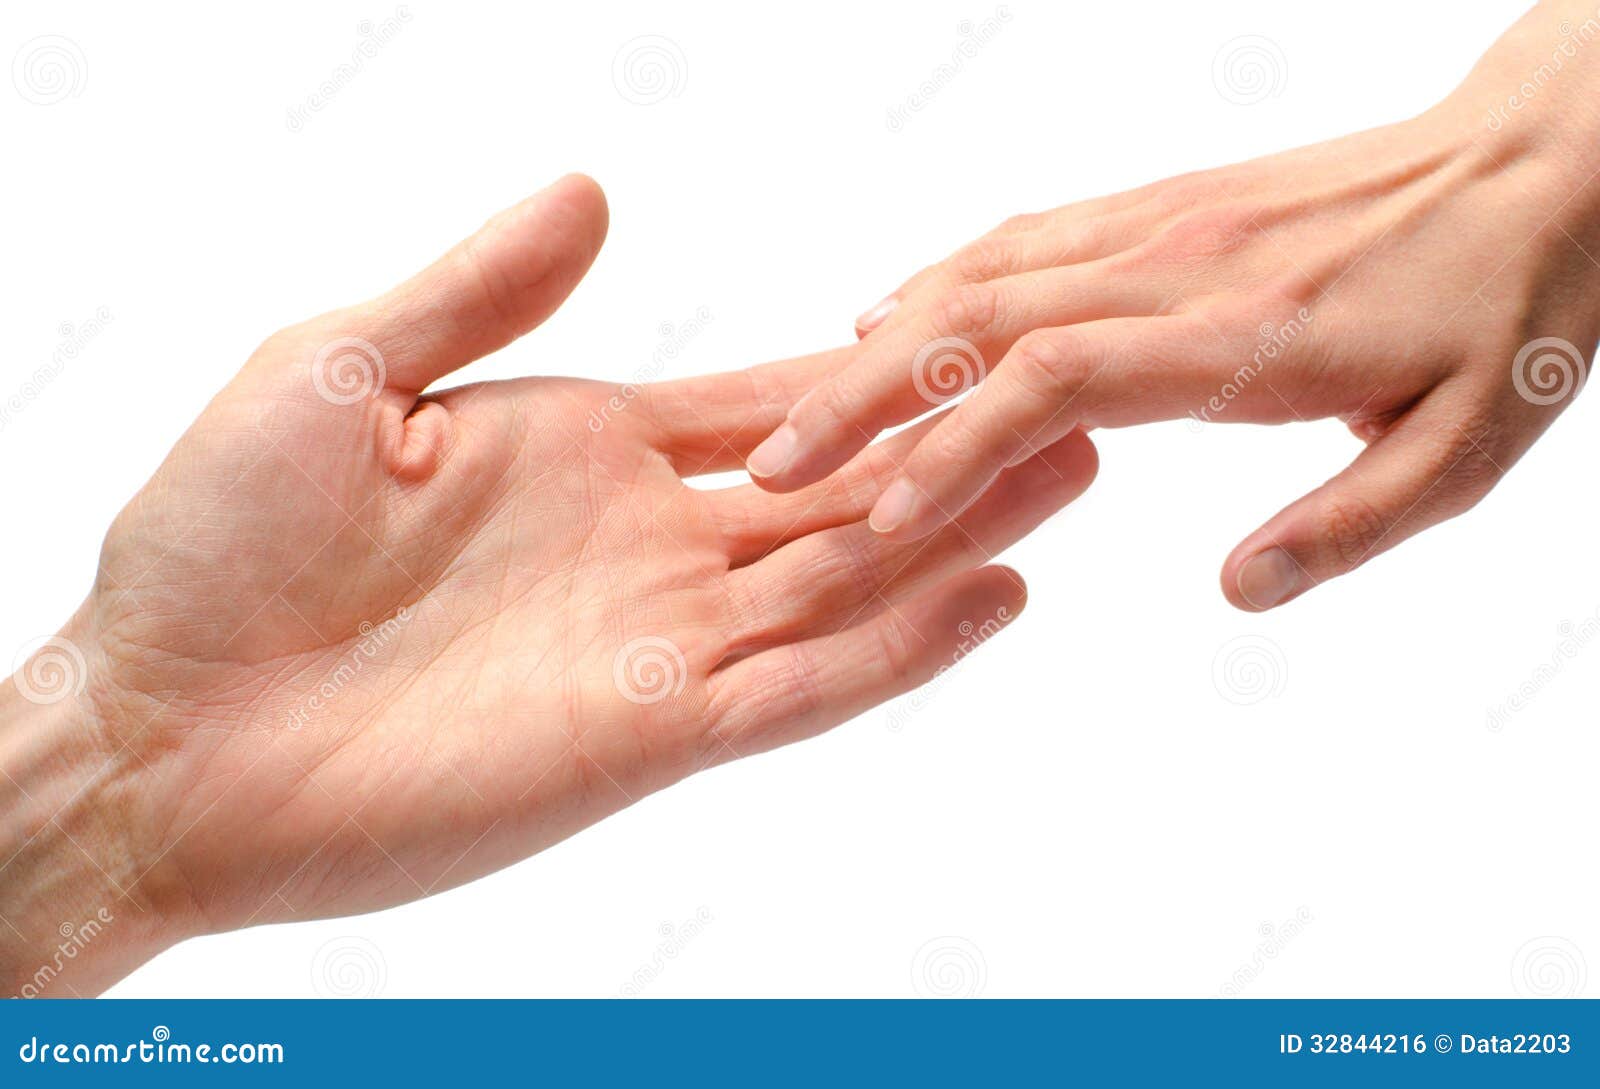 man and woman hands touching